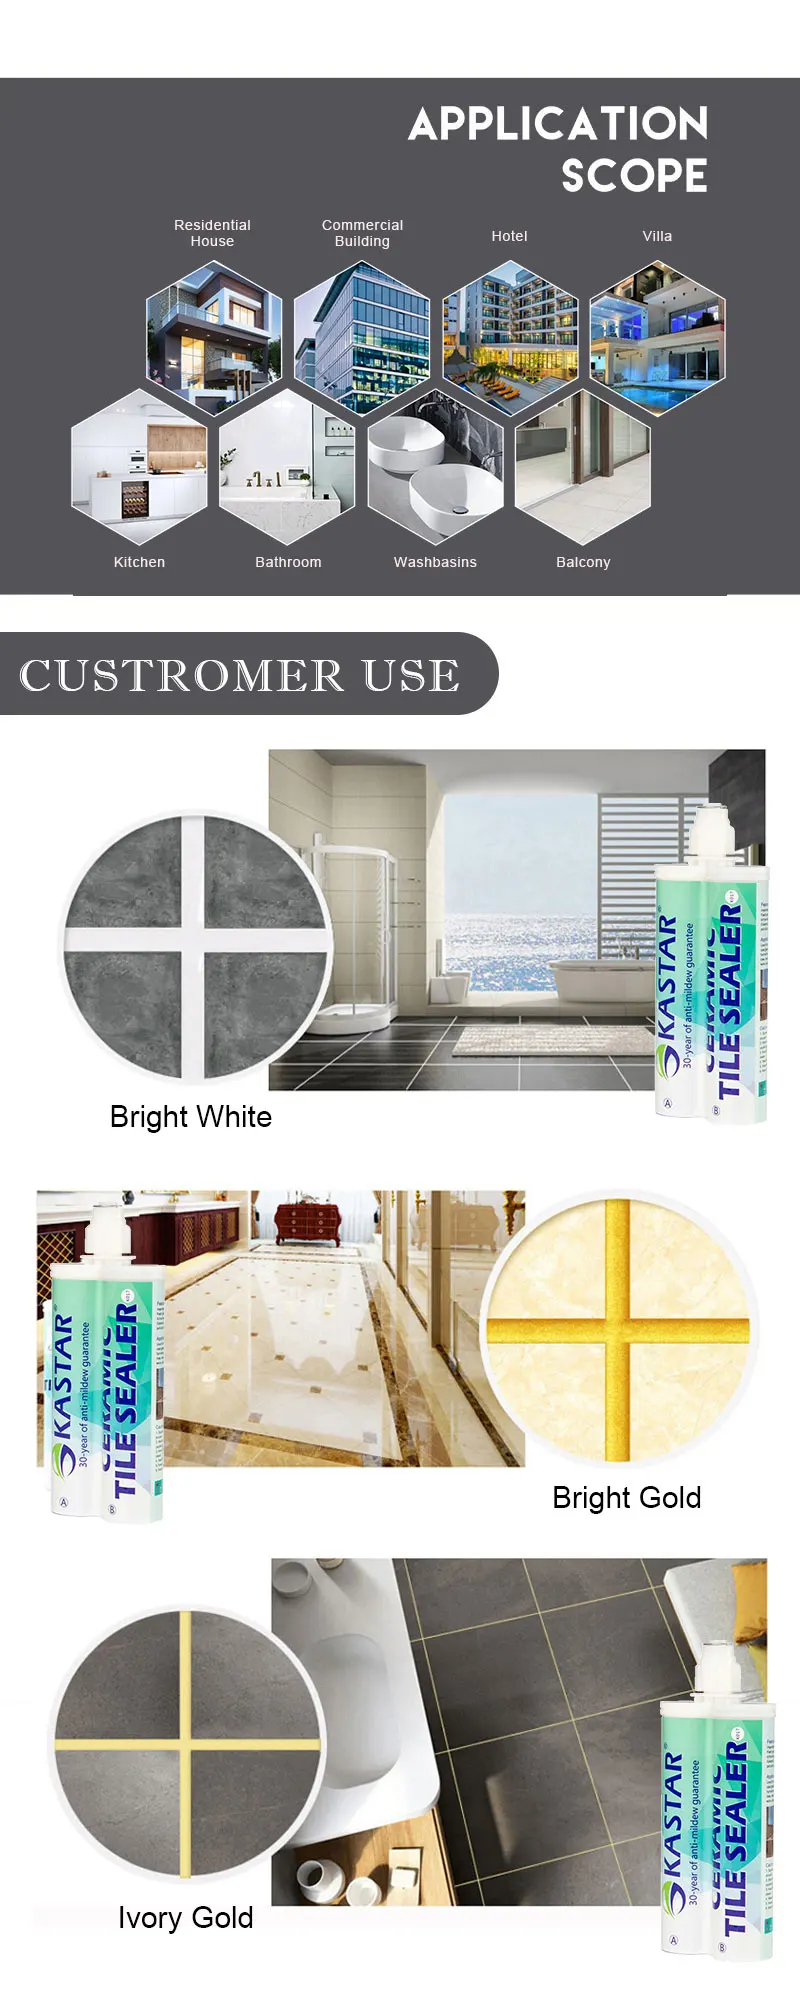 Easy Construction 2-Part Water Resistance Blacken Proof Epoxy Grout Price For Healthy Decoration